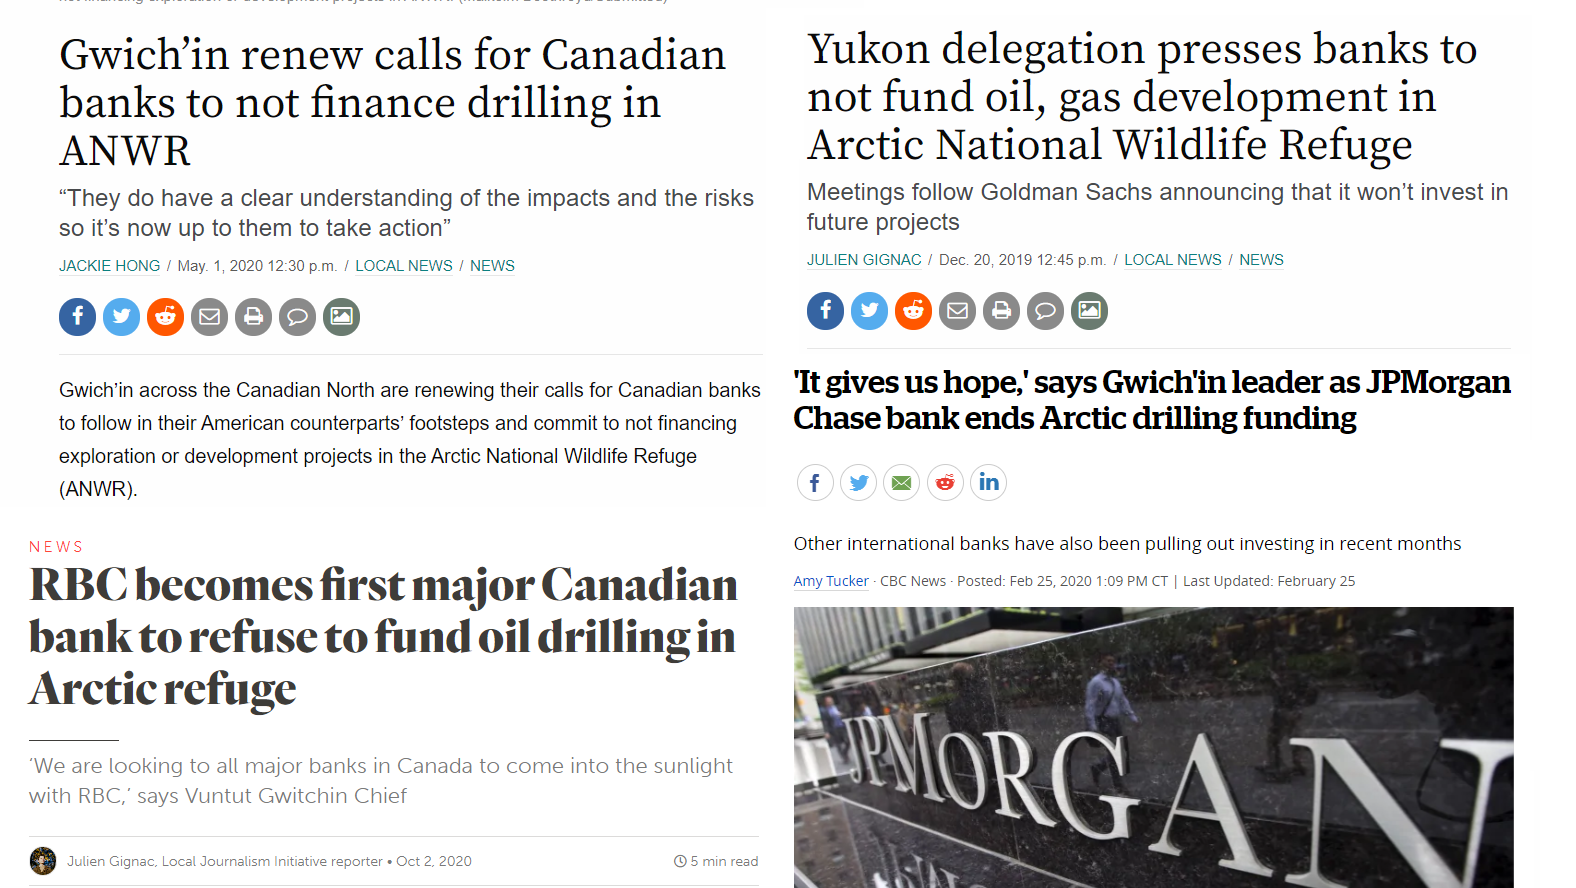 Collage of news headlines on major banks committing to not fund drilling in the Arctic Refuge